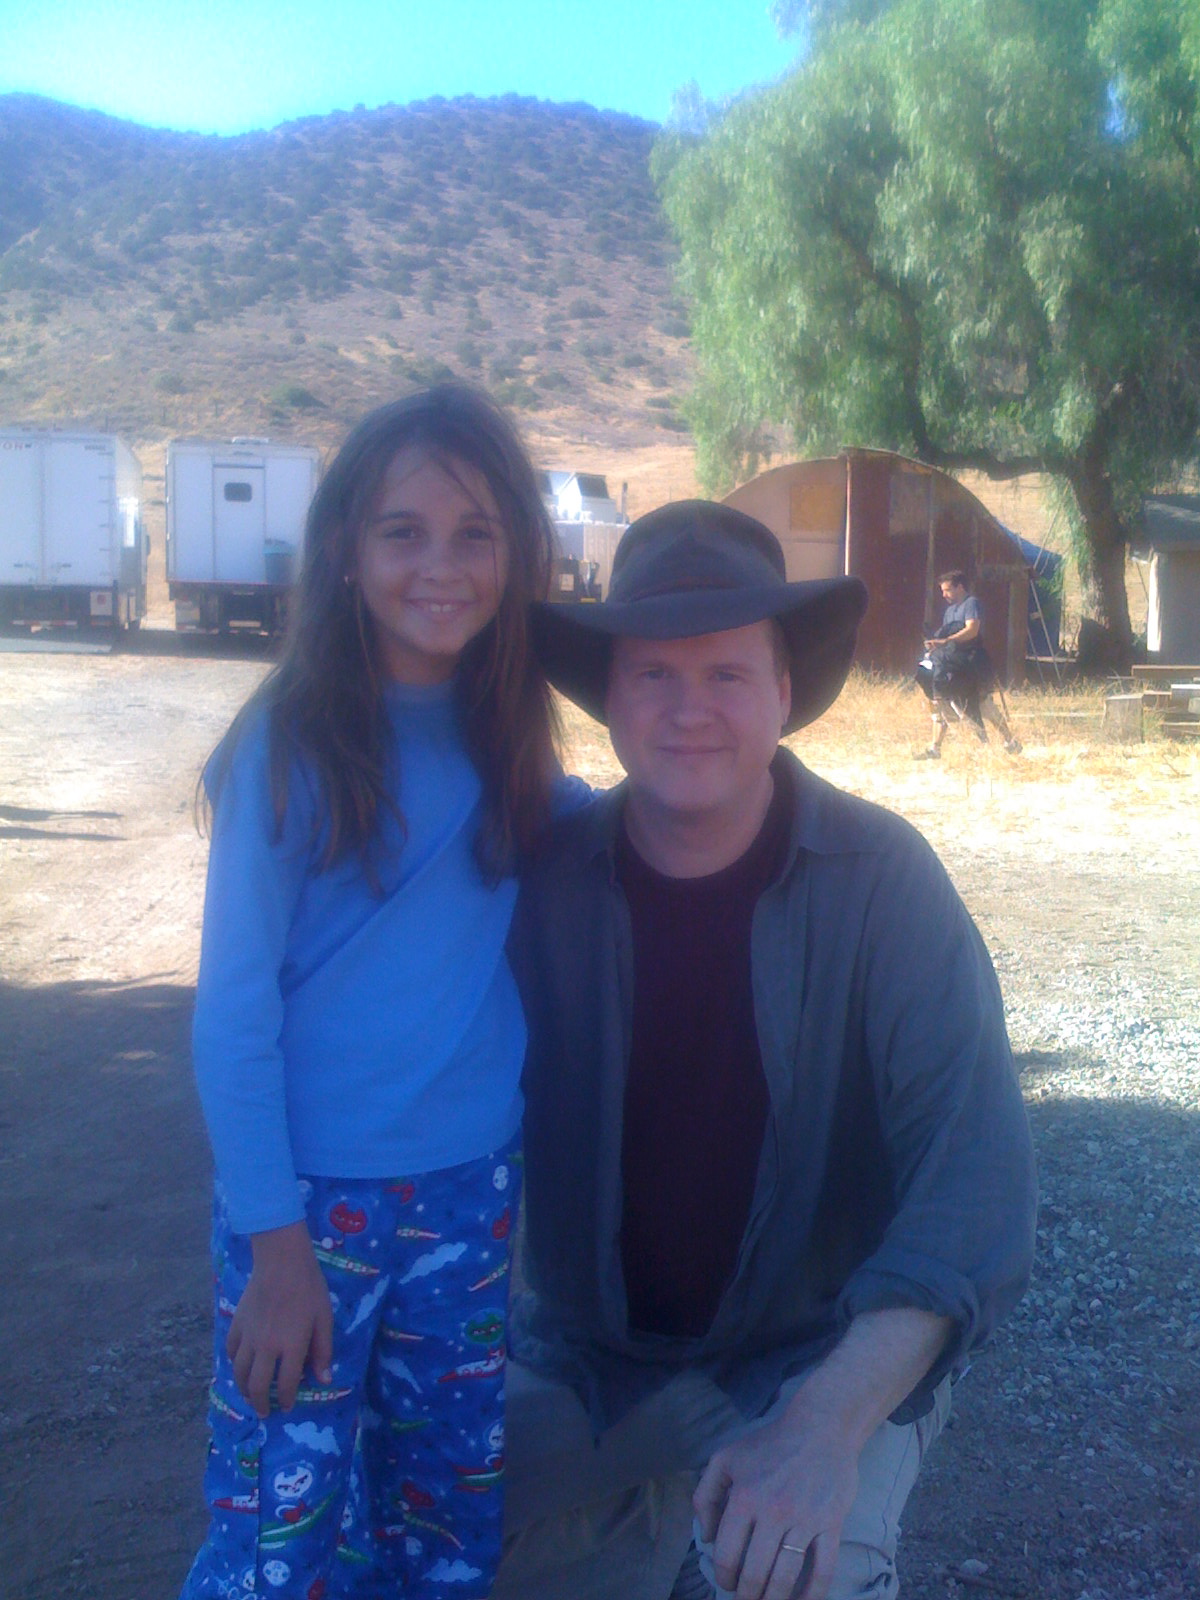 Haley Pullos and Joss Whedon on the set of Dollhouse